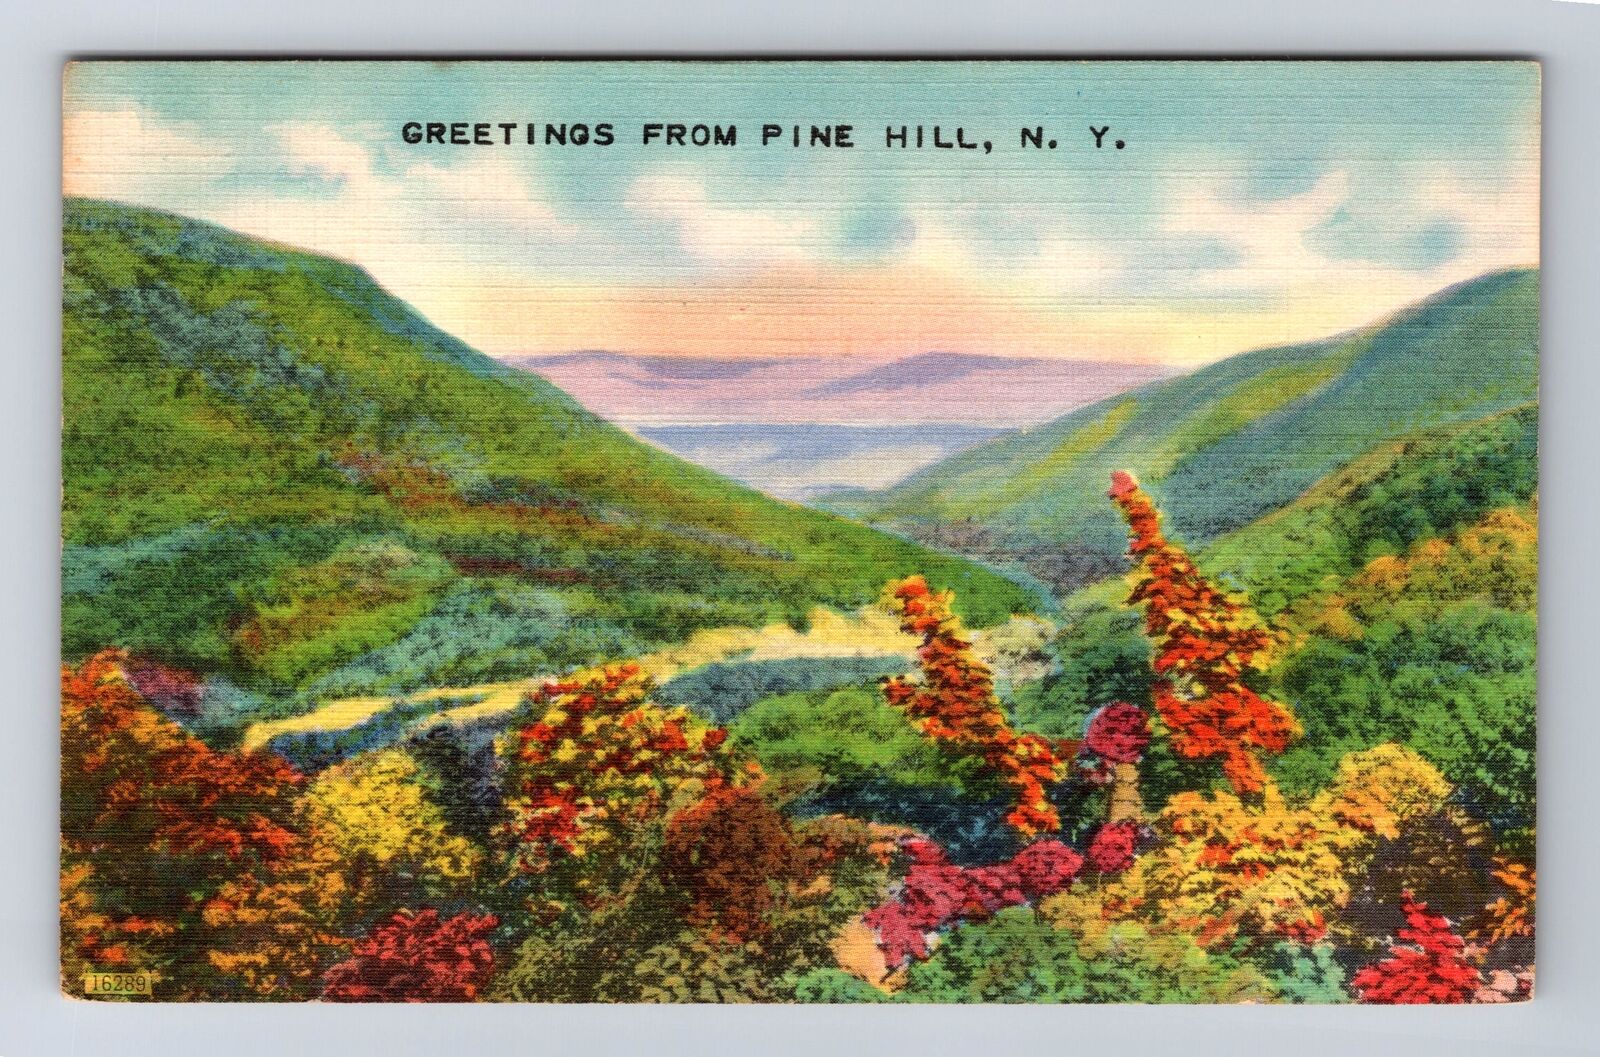 Pine Hill NY-New York, General Greetings, Fall on Pine Hill, Vintage Postcard